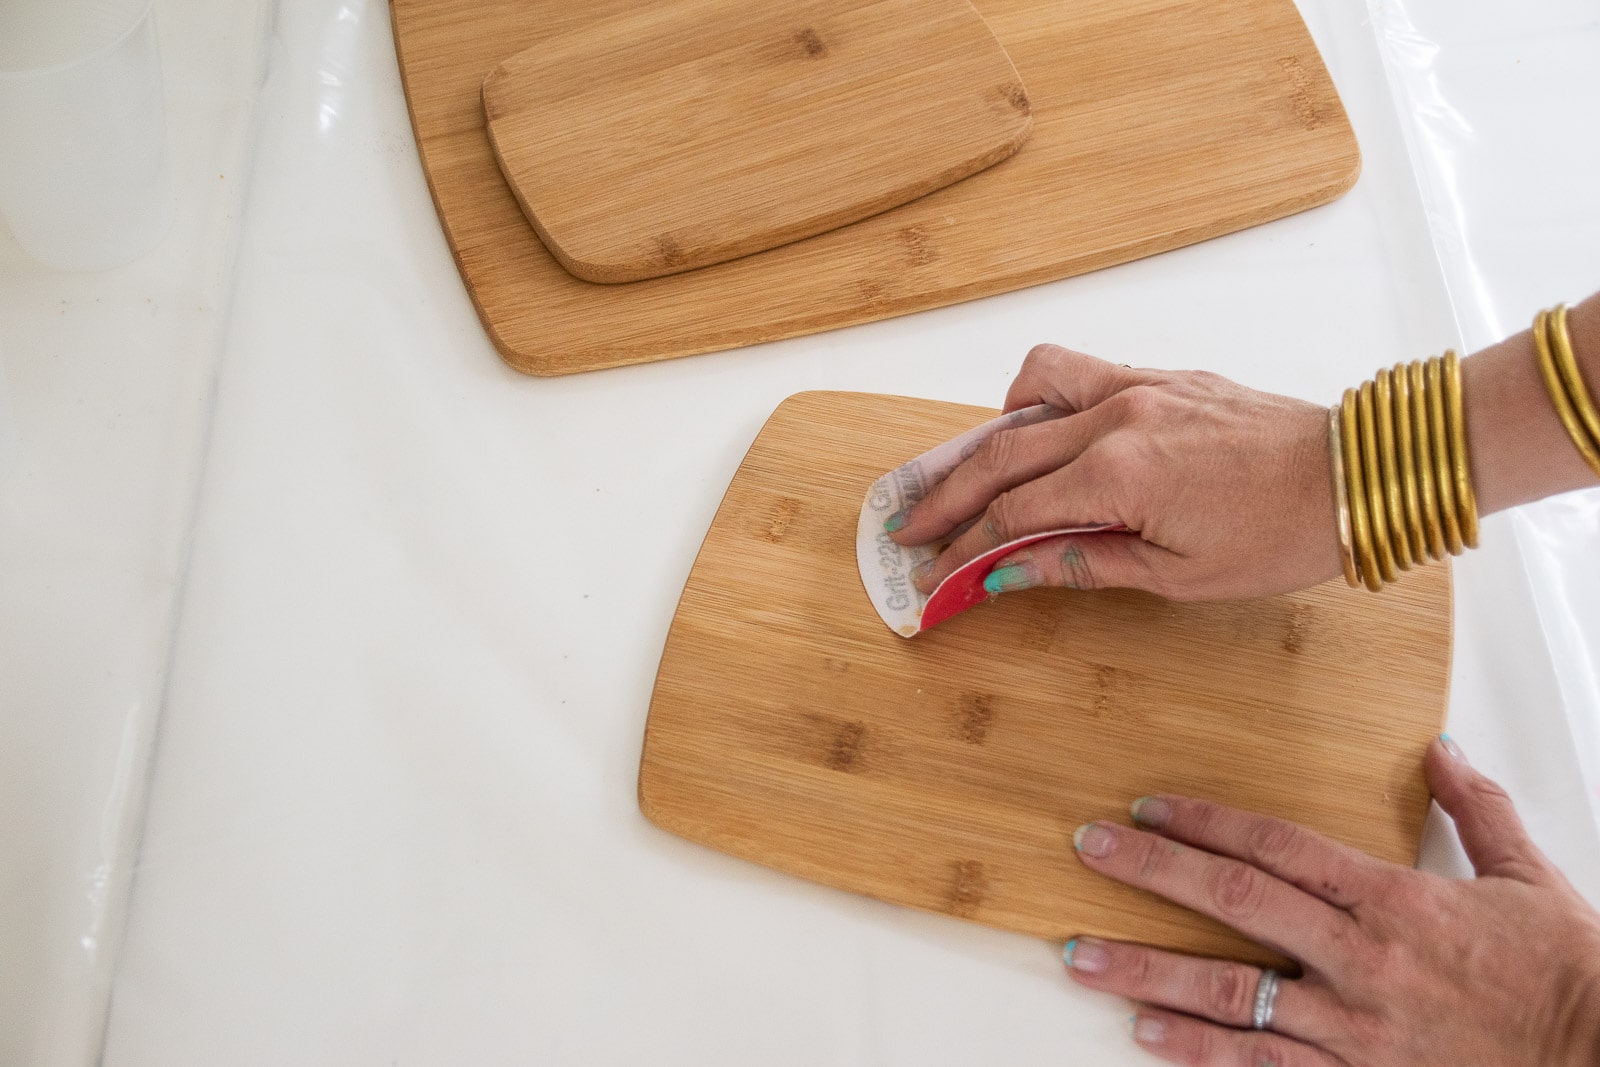 sand and tape the cutting board